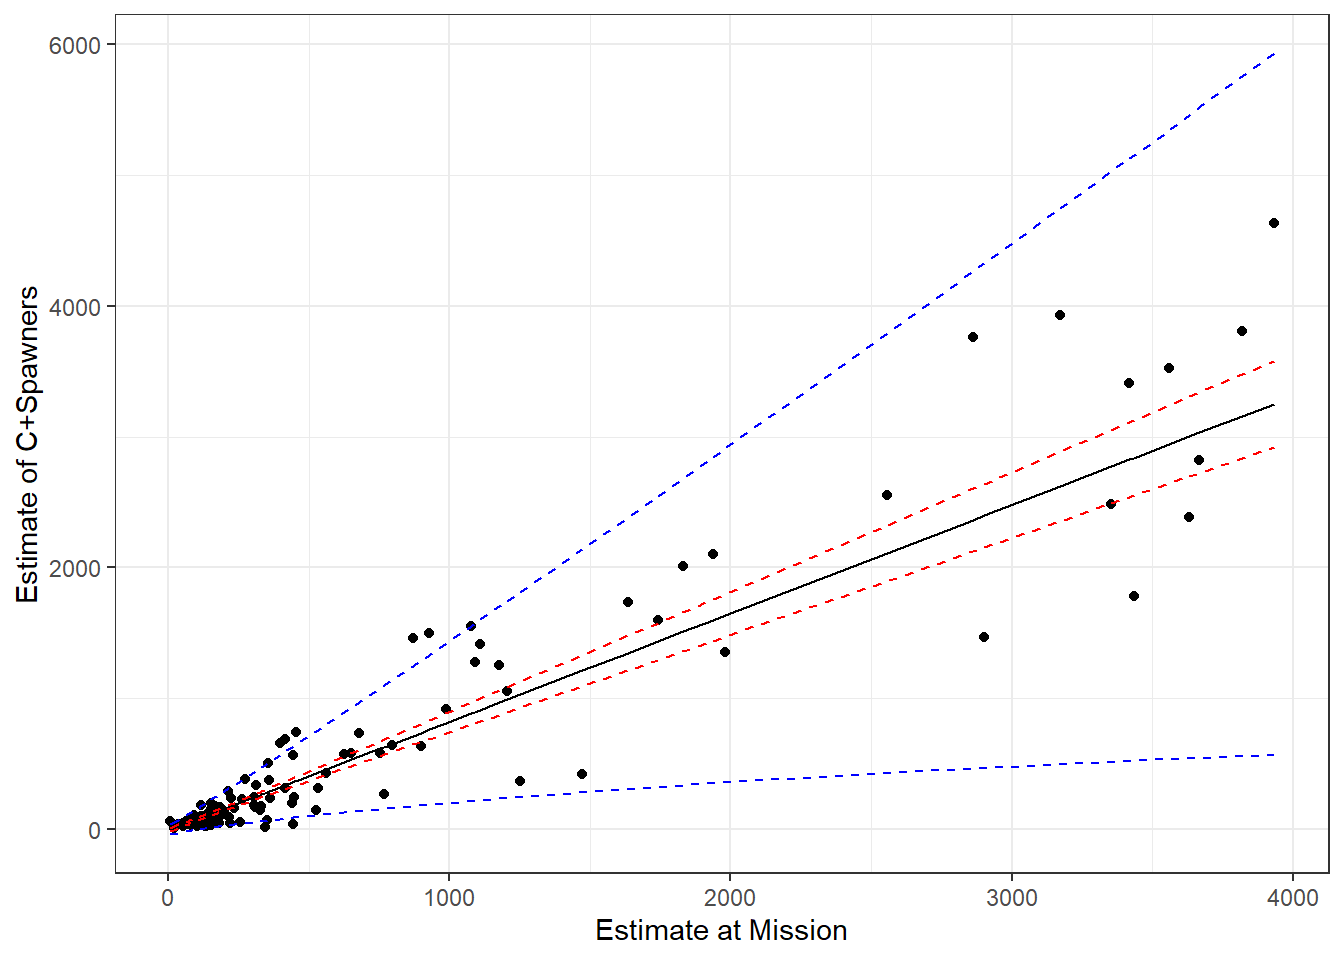 Predictions for the catch and spawning escapement based on the count of sockeye salmon at Mission. Blue and red lines depict 95% prediction and confidence intervals, respectively.